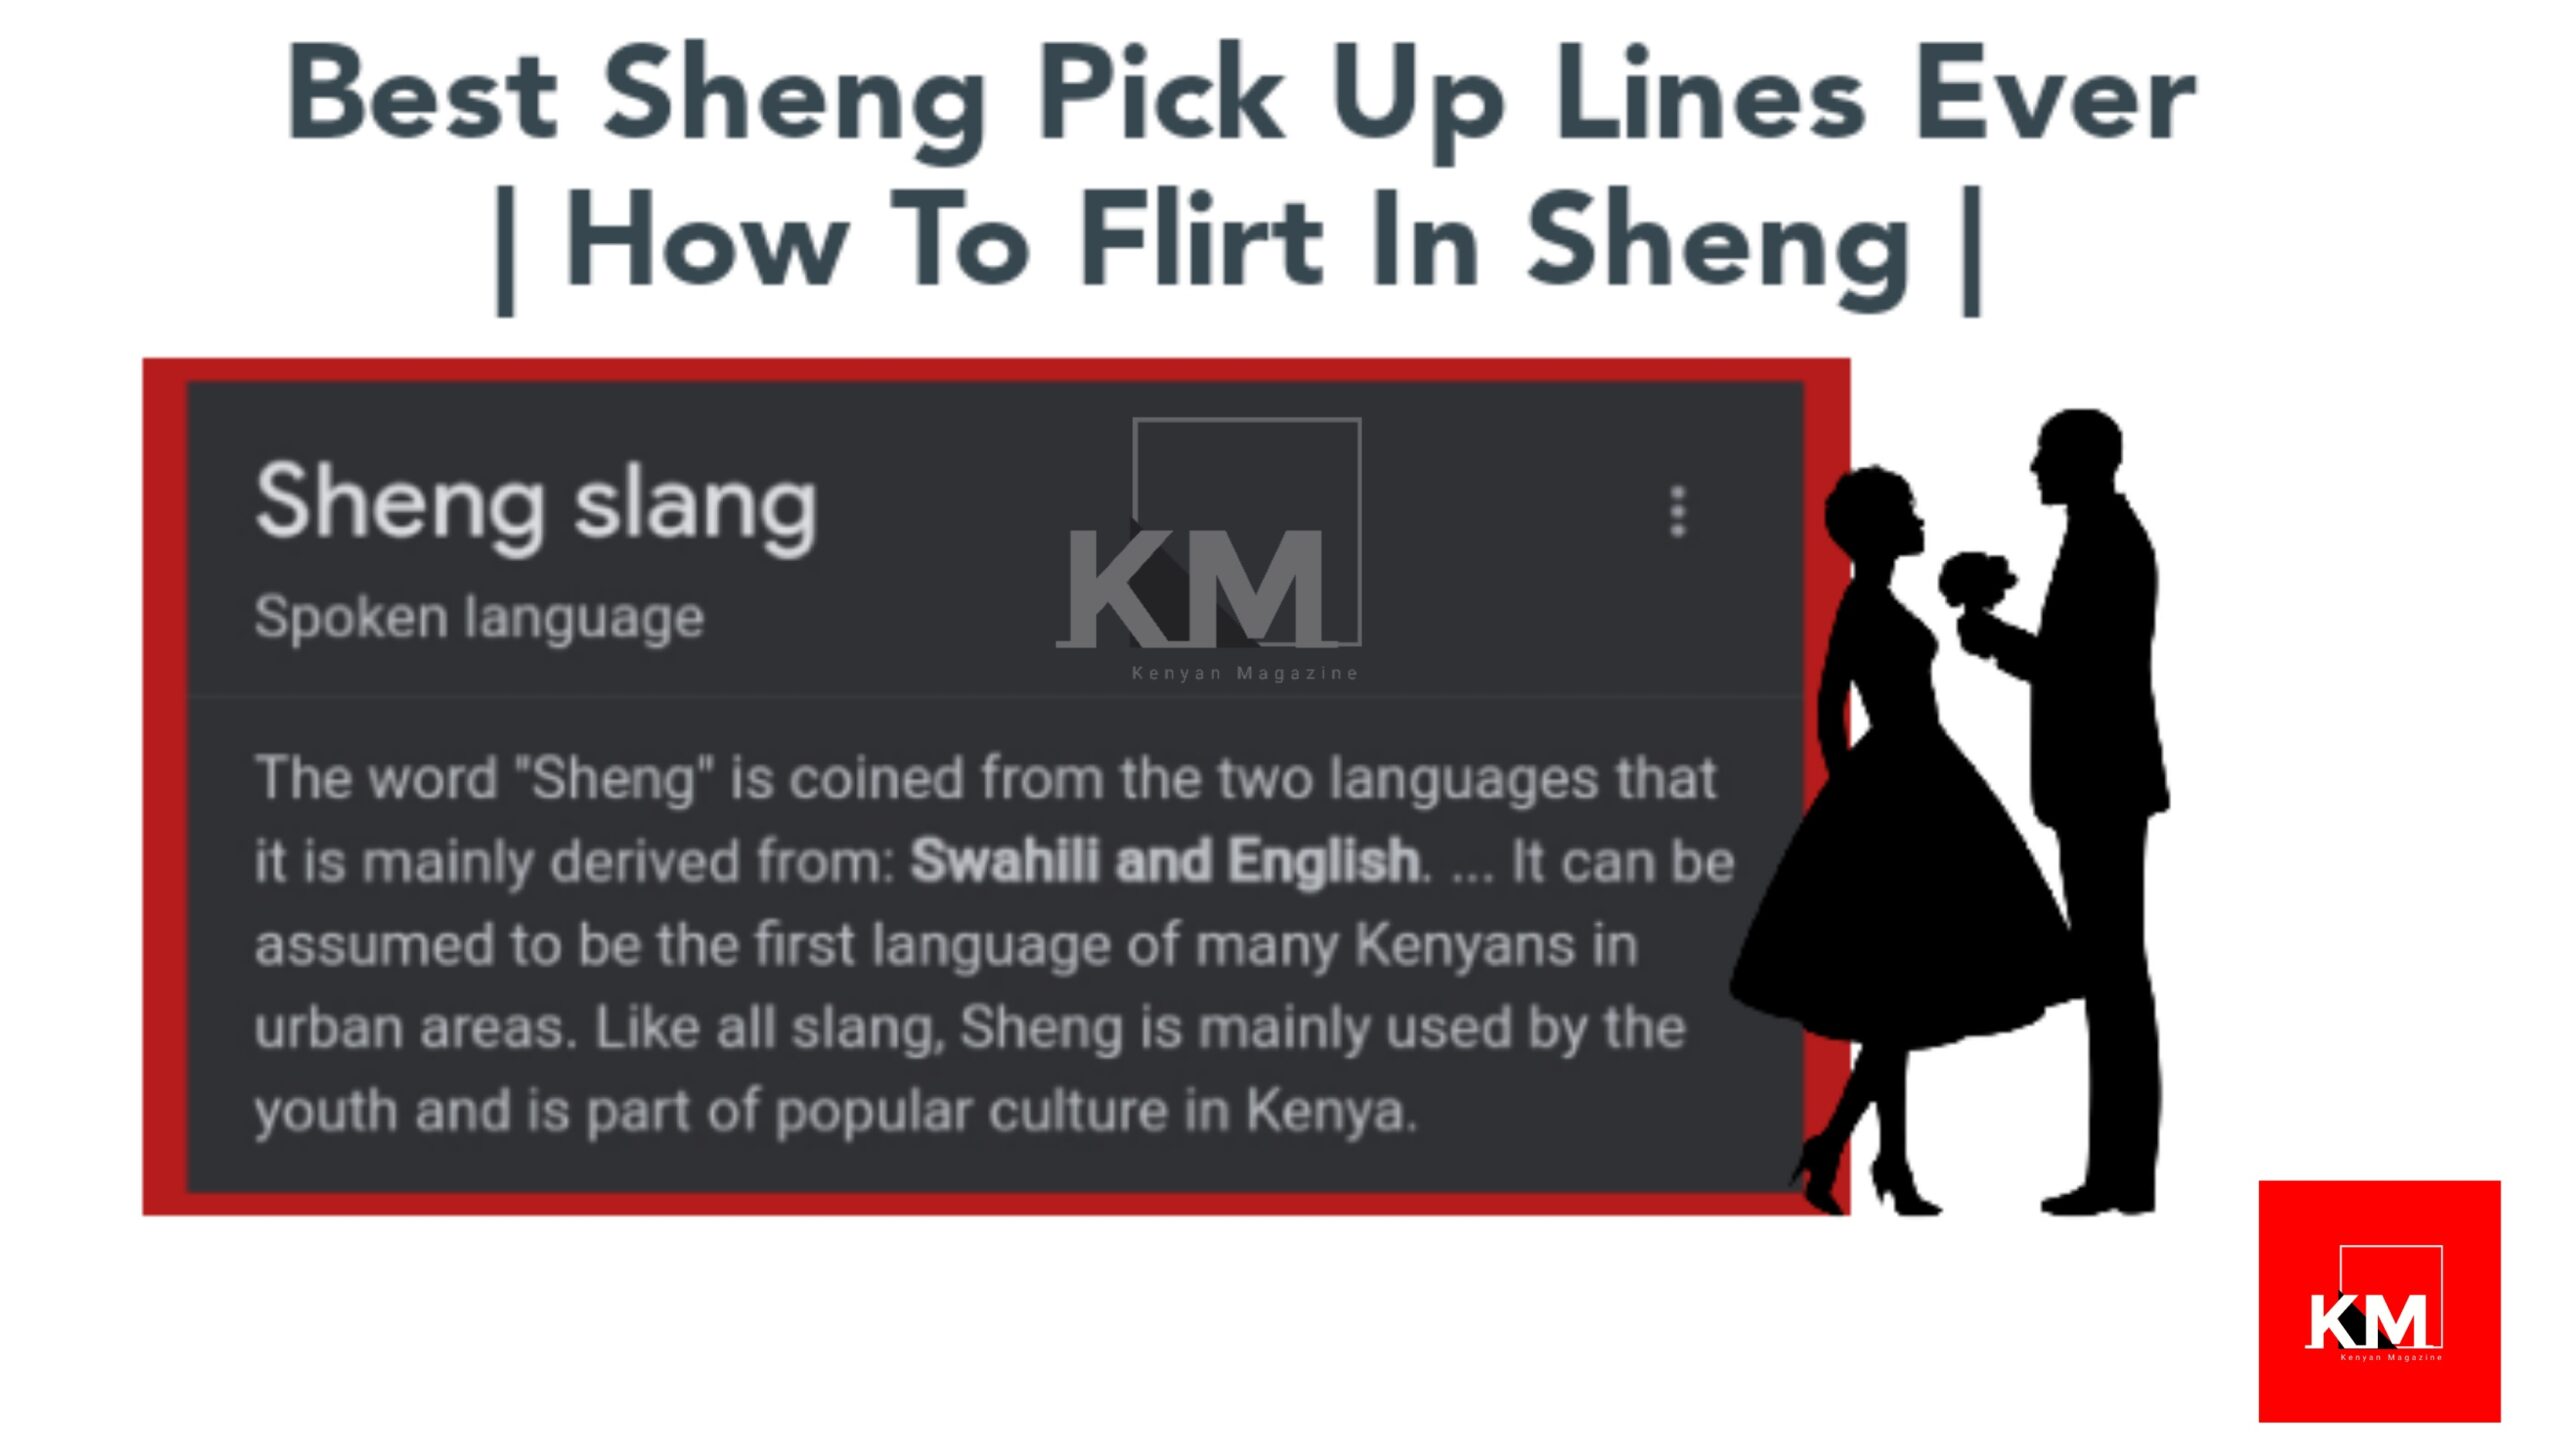 Sheng Lines and how to Flirt in sheng